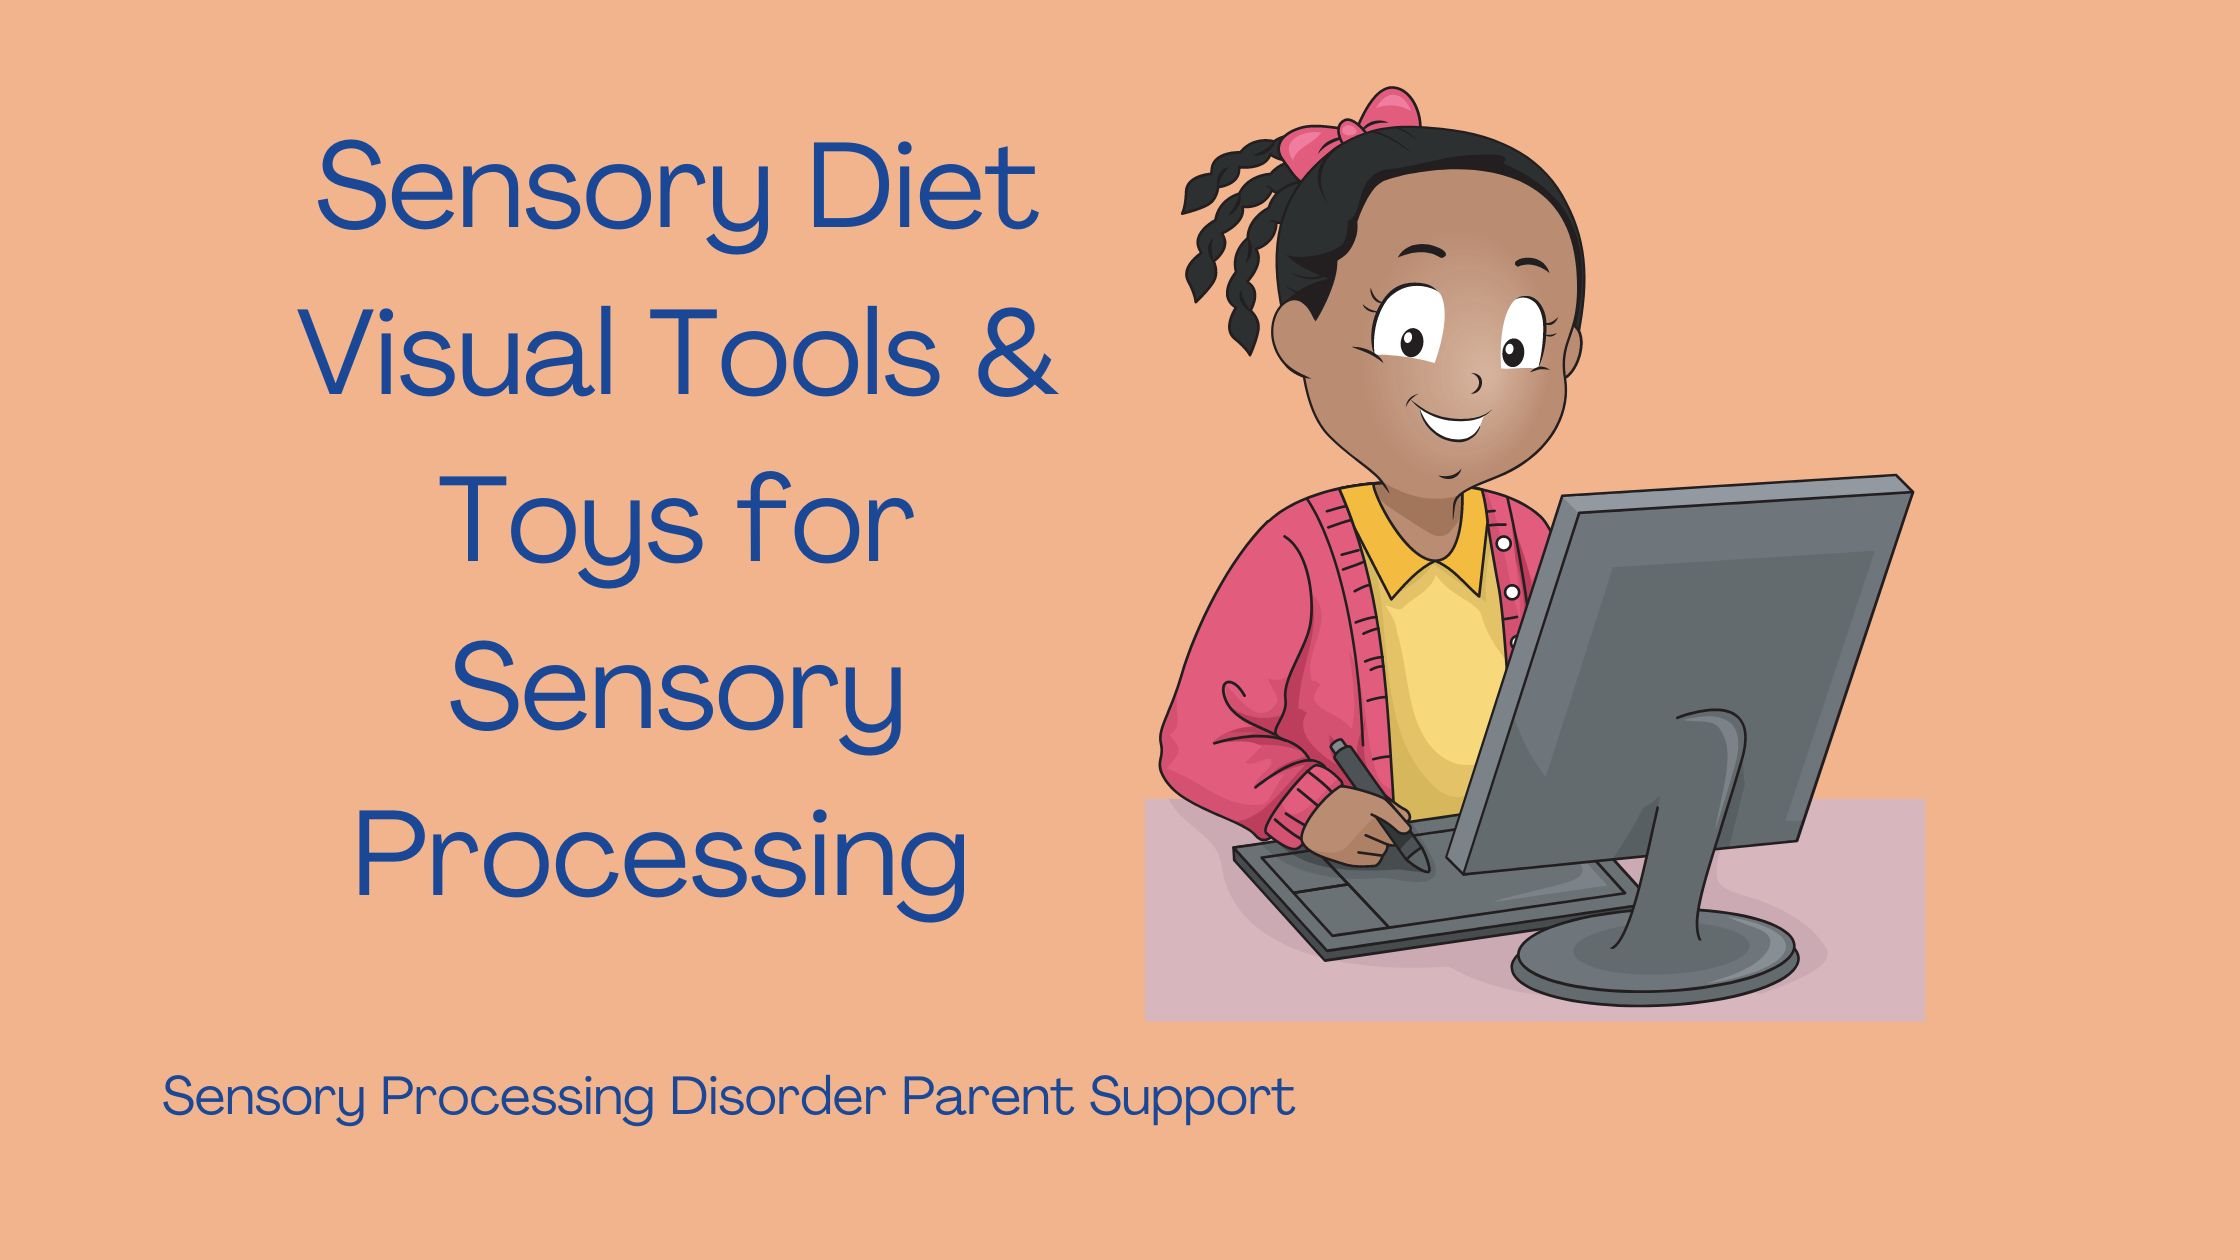 child with sensory differences looking at the computer Sensory Diet Visual Tools & Toys for Sensory Processing